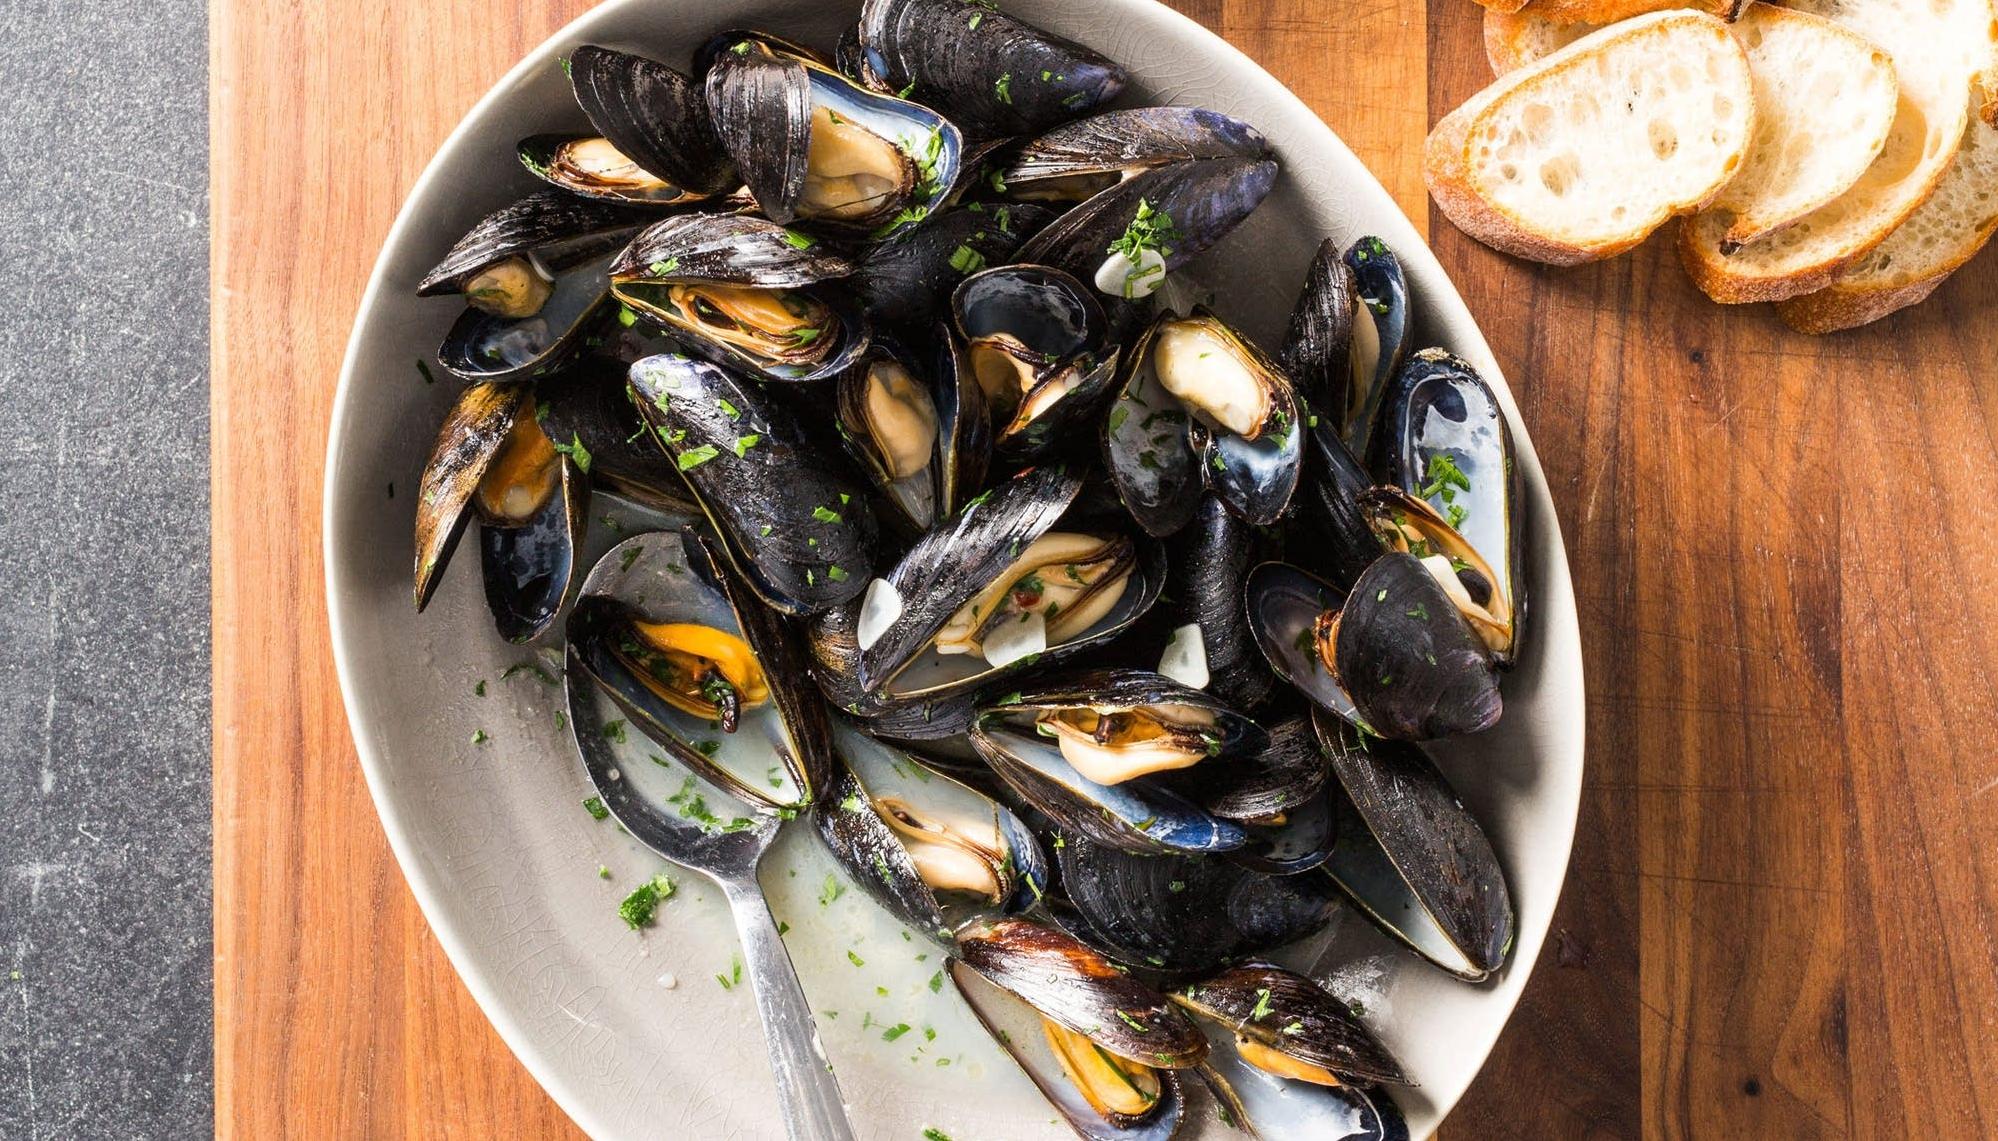  Dive in to the briny flavor of fresh bay mussels swimming in a savory white wine sauce.